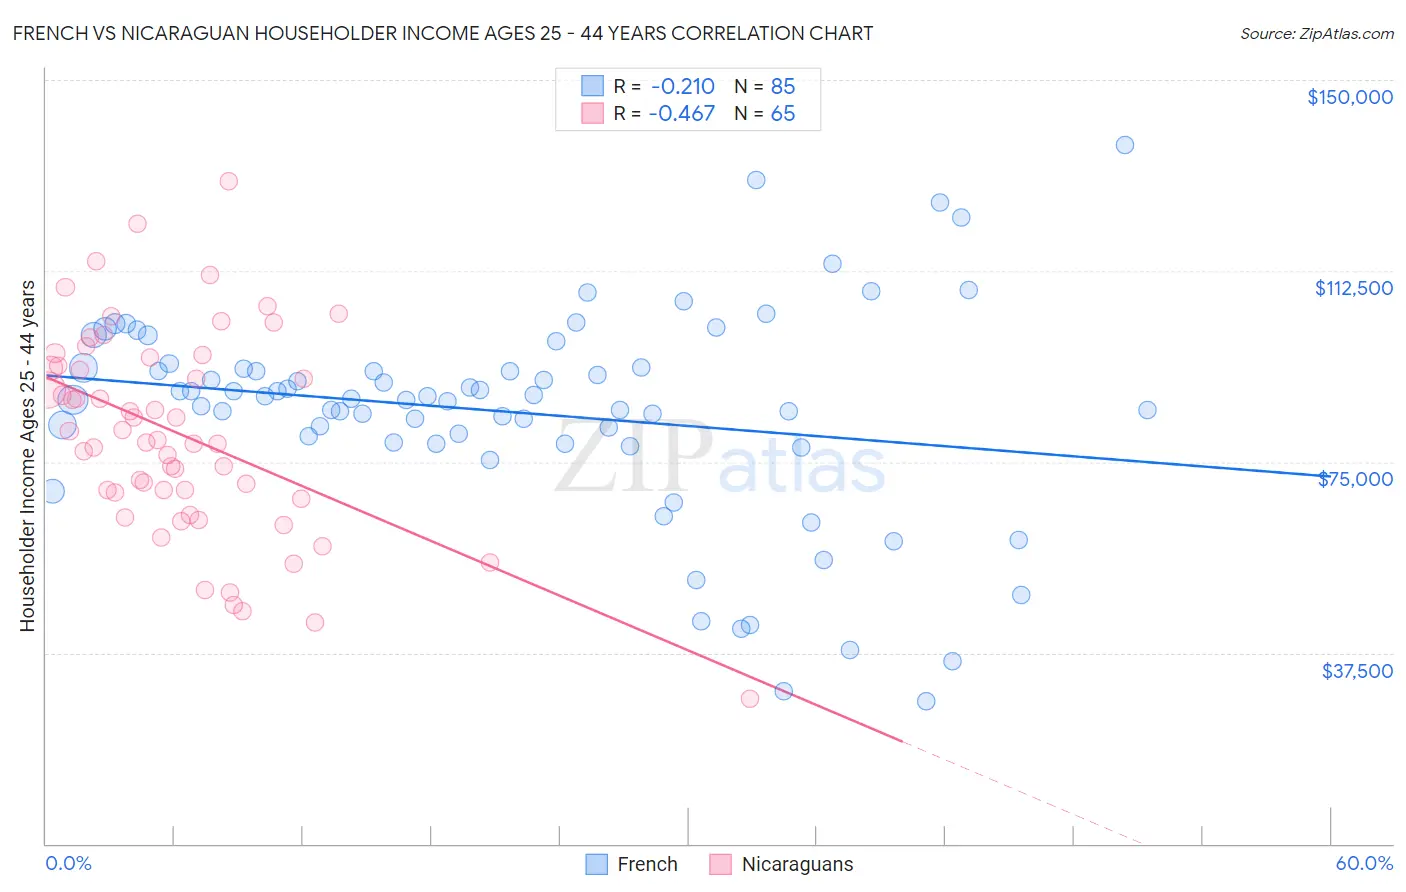 French vs Nicaraguan Householder Income Ages 25 - 44 years